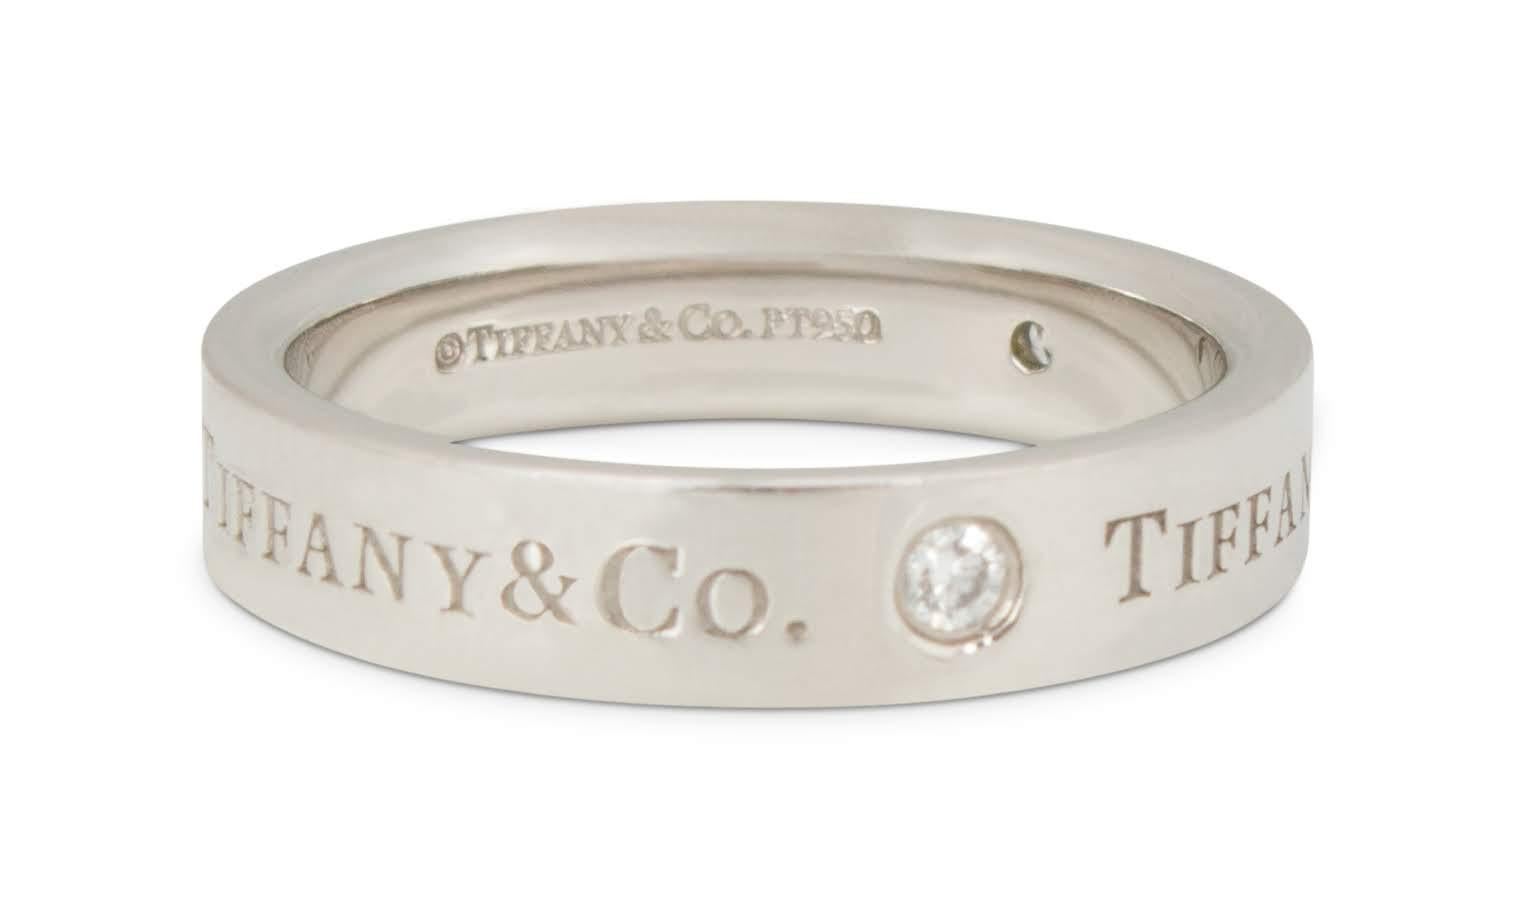 Authentic Tiffany & Co. ring crafted in platinum with 3 round brilliant cut diamonds weighing approximately .04ct each.  Engraved Tiffany & Co. on the outside of the band and signed Tiffany & Co. PT950.  Size 5 3/4.  CIRCA 2010s